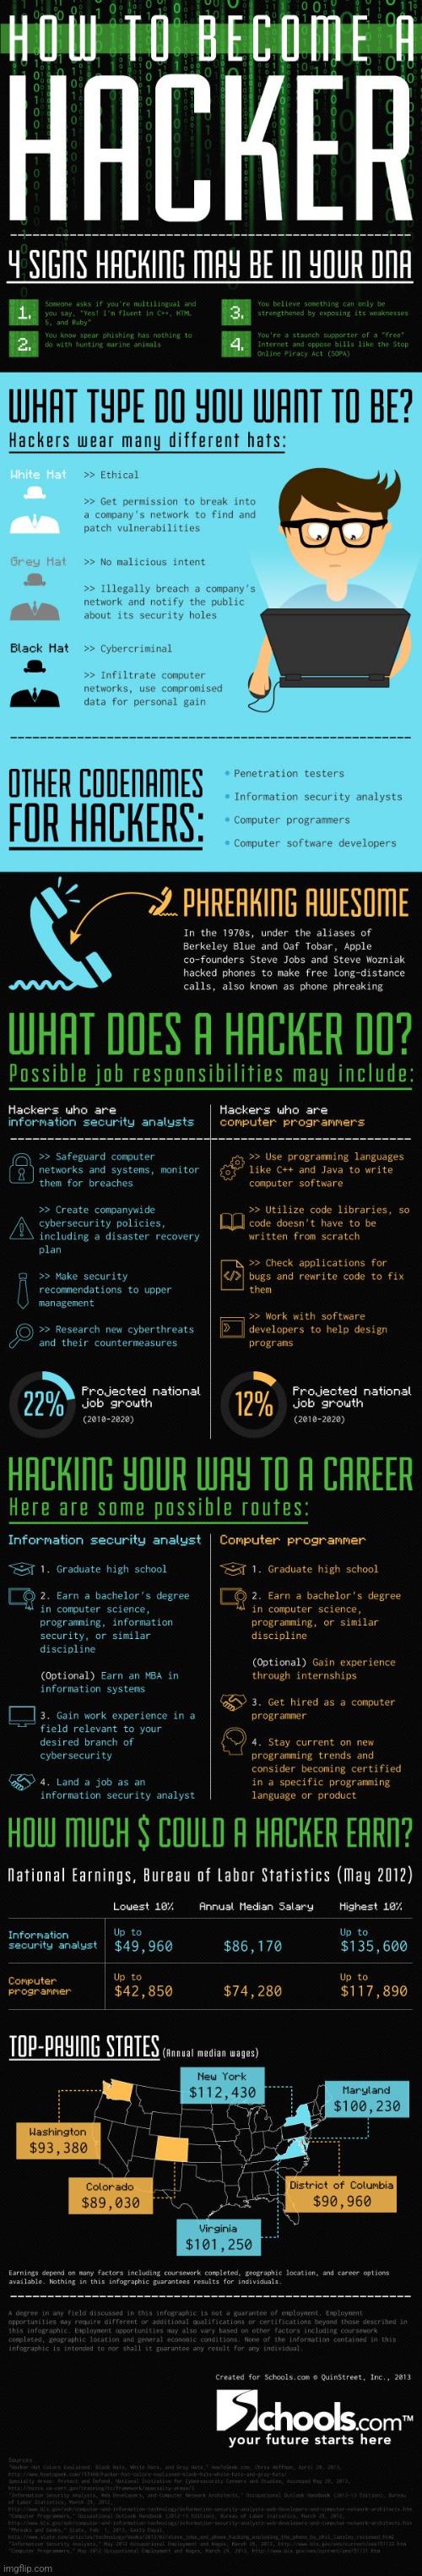 How To Become A Hacker (Not Mine - Repost) | image tagged in simothefinlandized,hackers,tutorial | made w/ Imgflip meme maker